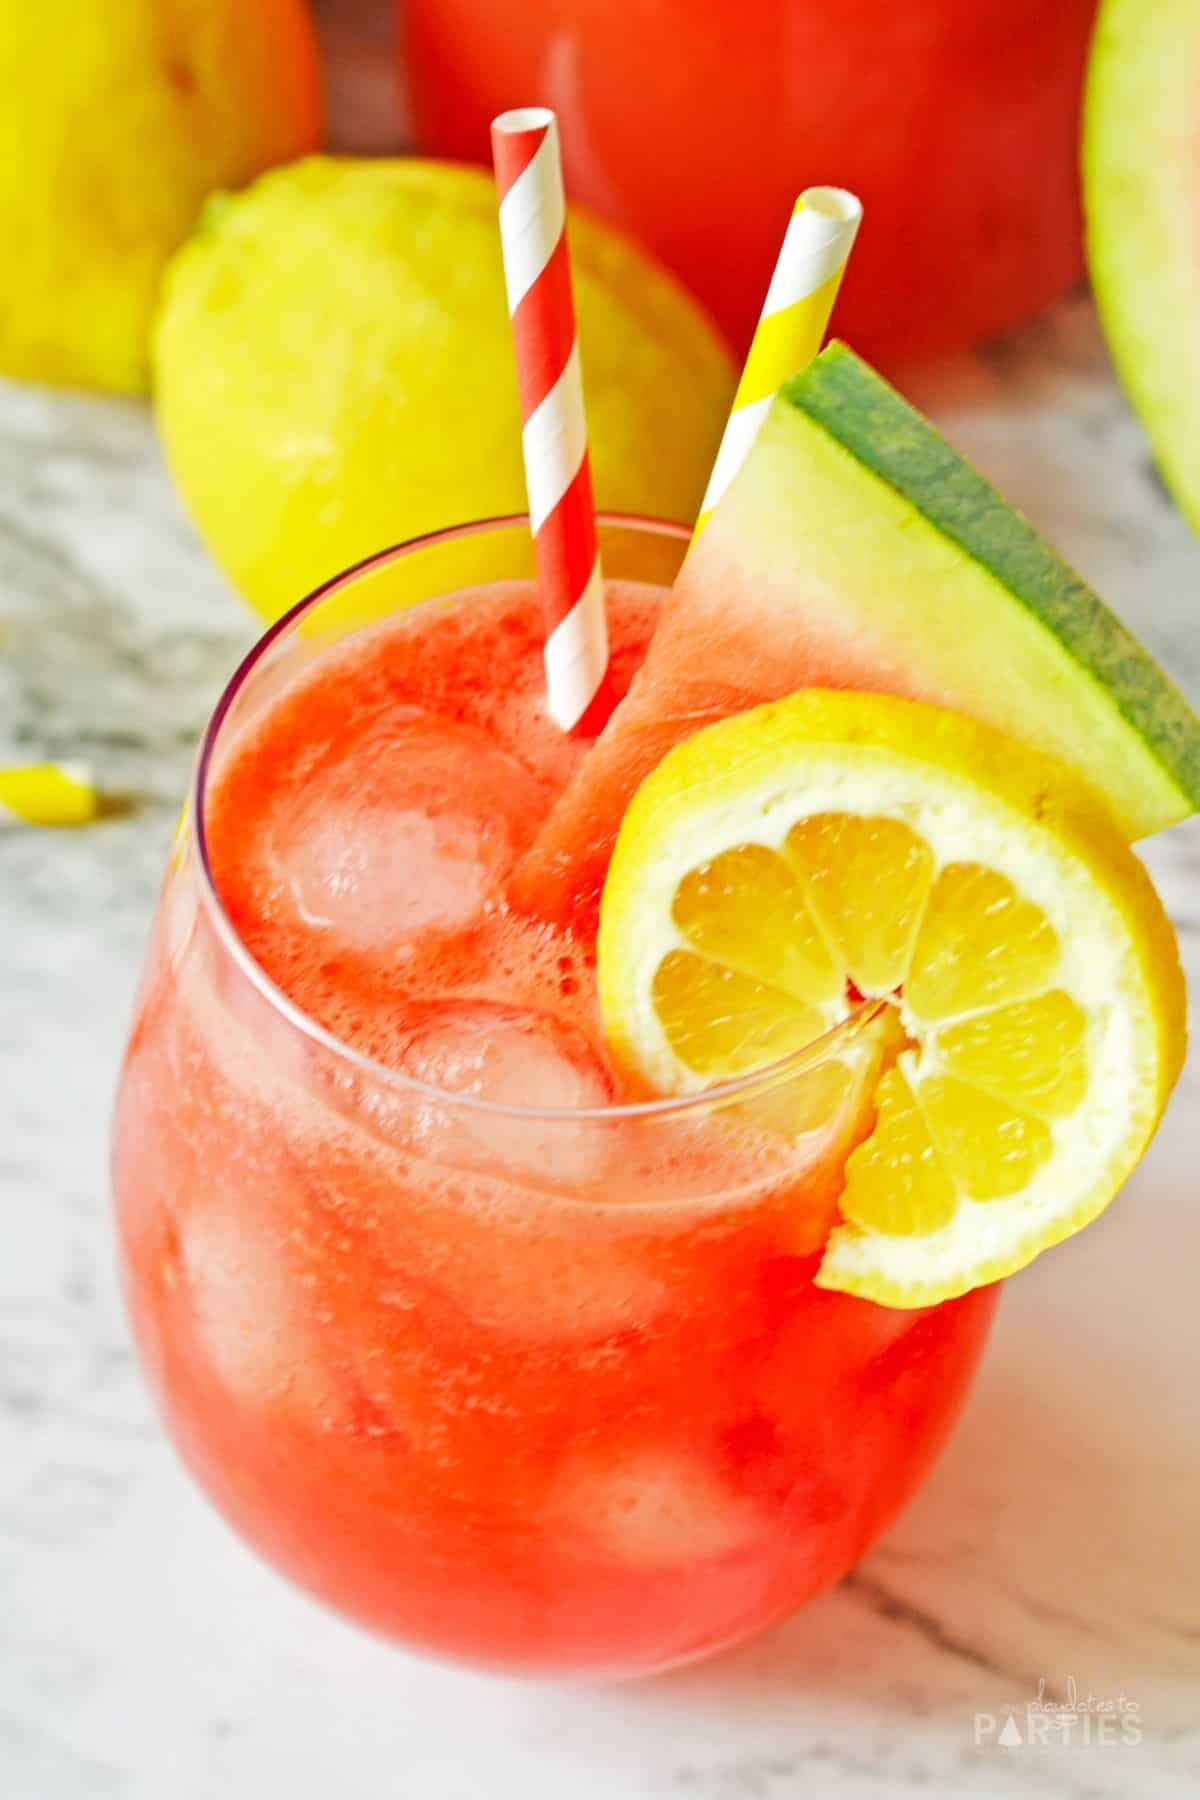 Overhead view of a red juice drink garnished with a lemon slice, watermelon wedge and colorful paper straws.